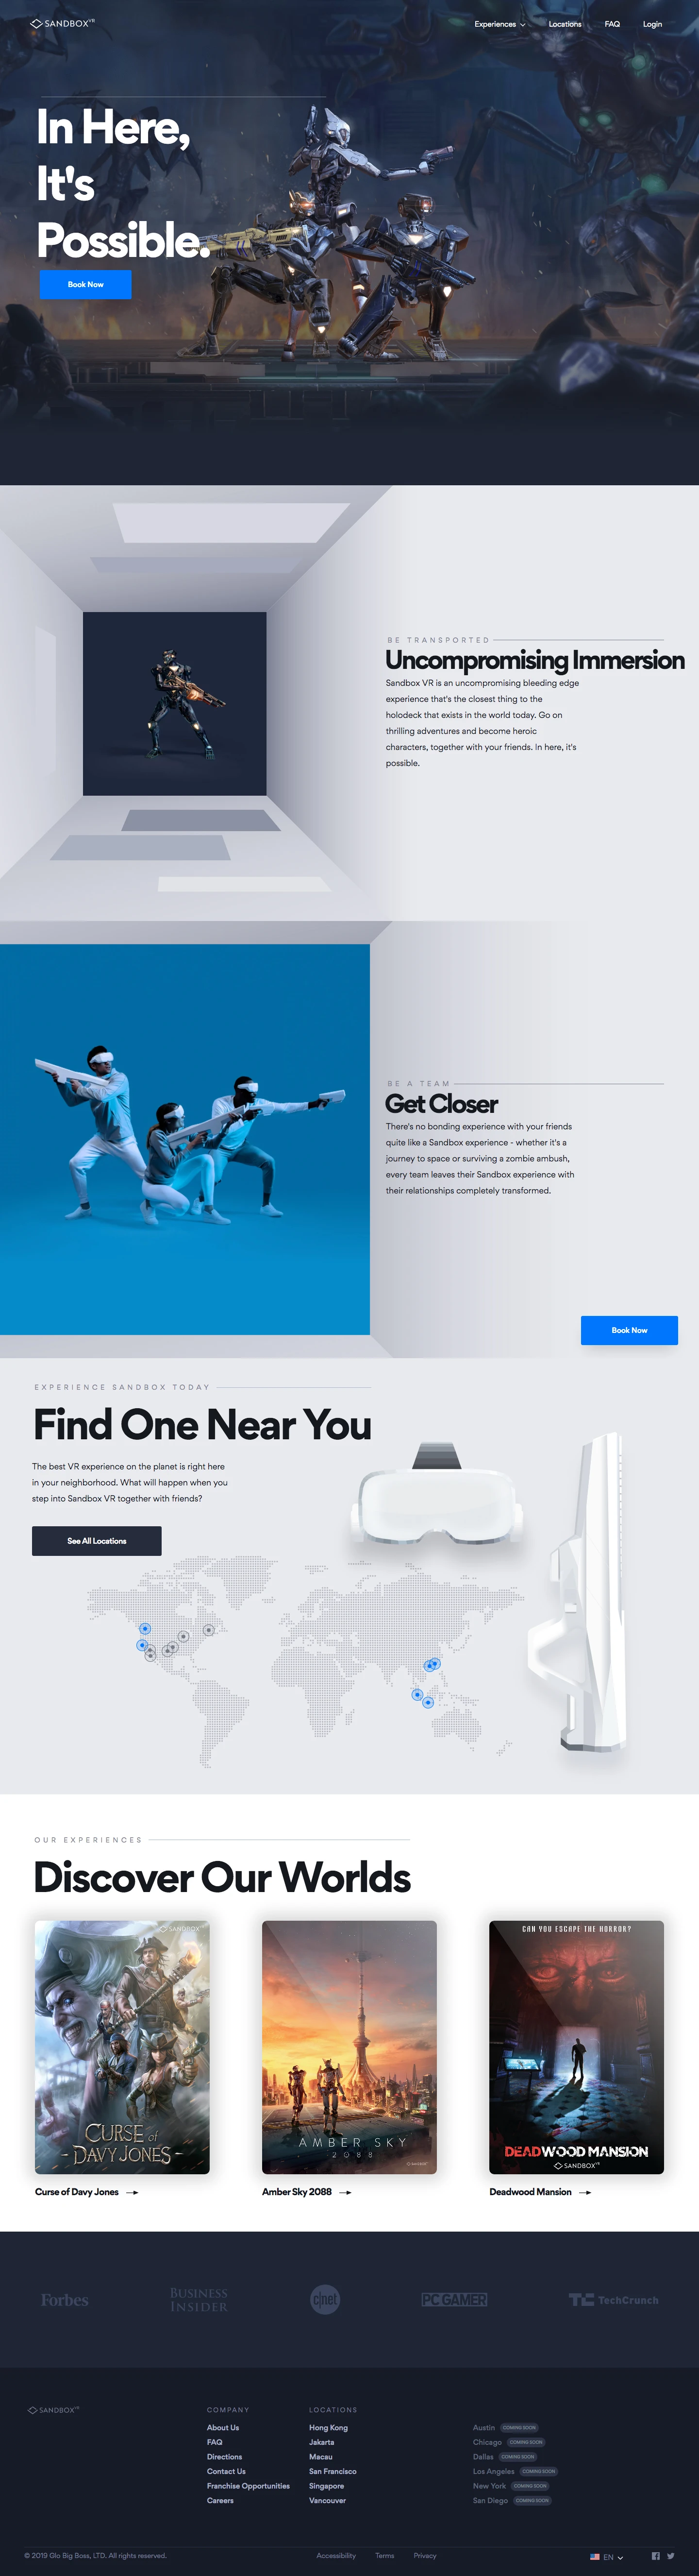 Sandbox VR Landing Page Example: Sandbox VR is the best VR experience in the world, period. You haven't experienced anything like this, we guarantee it.